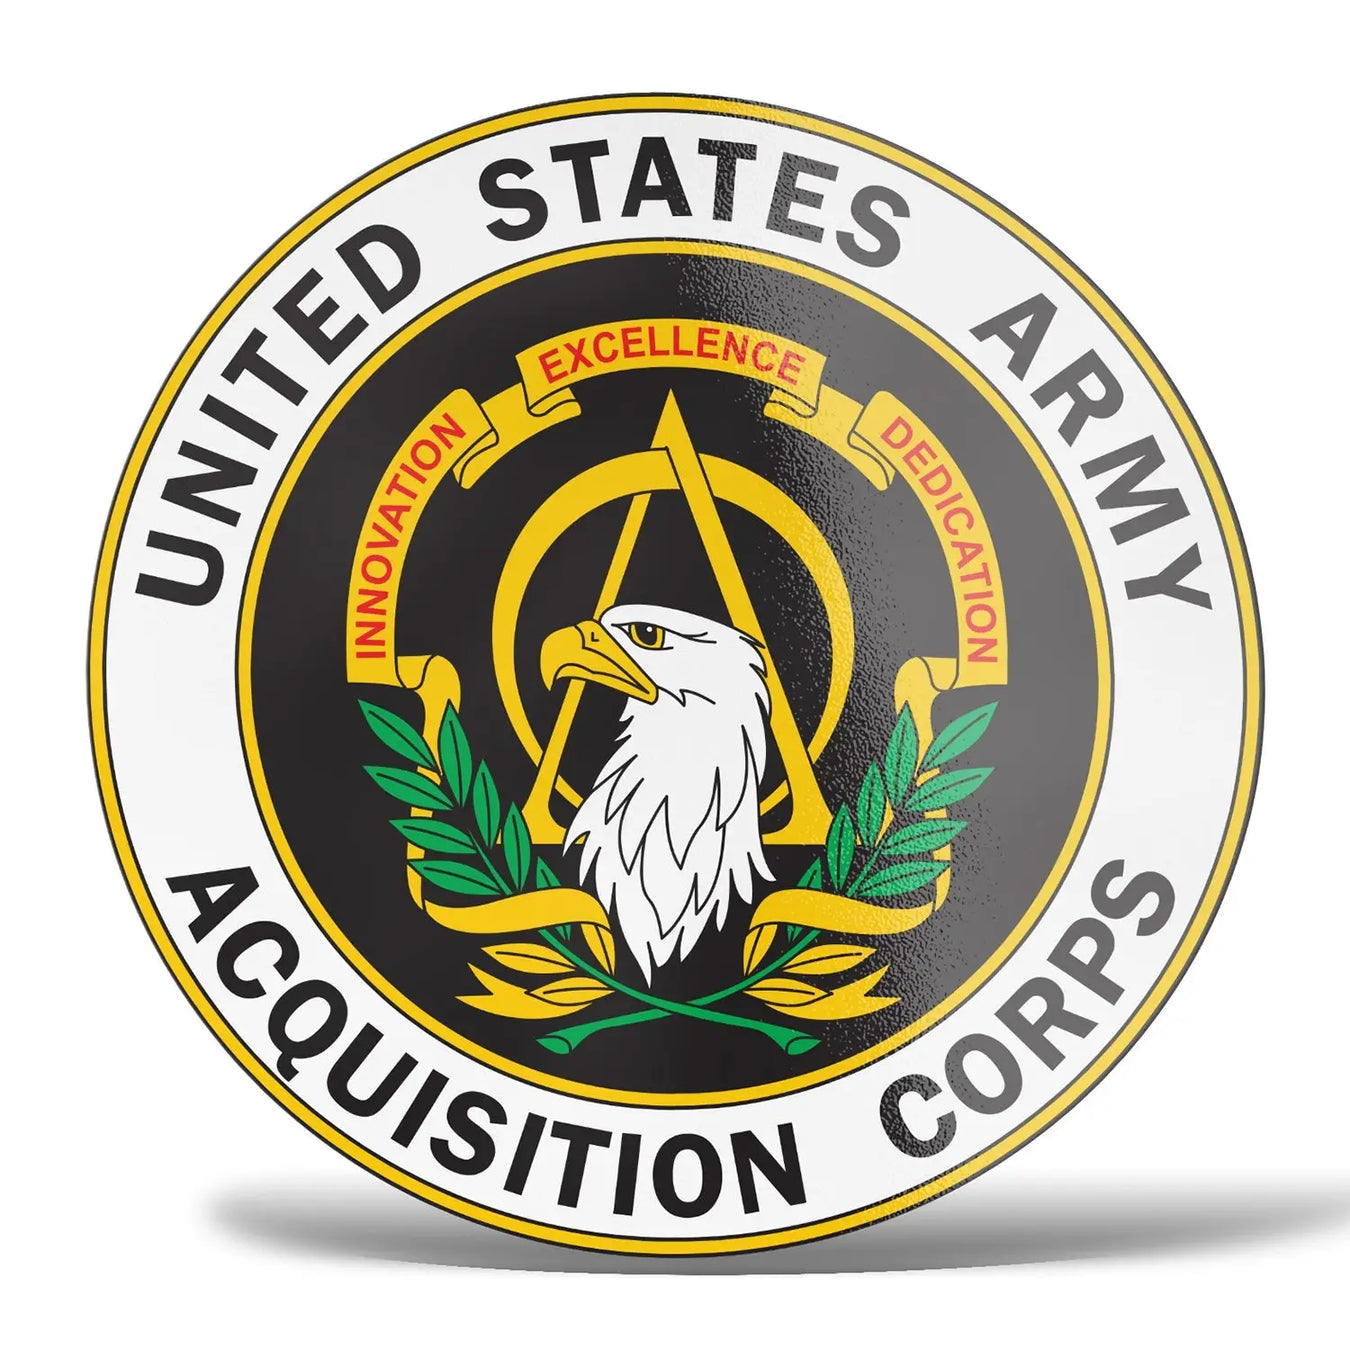 U.S. Army Acquisition Corps Decals